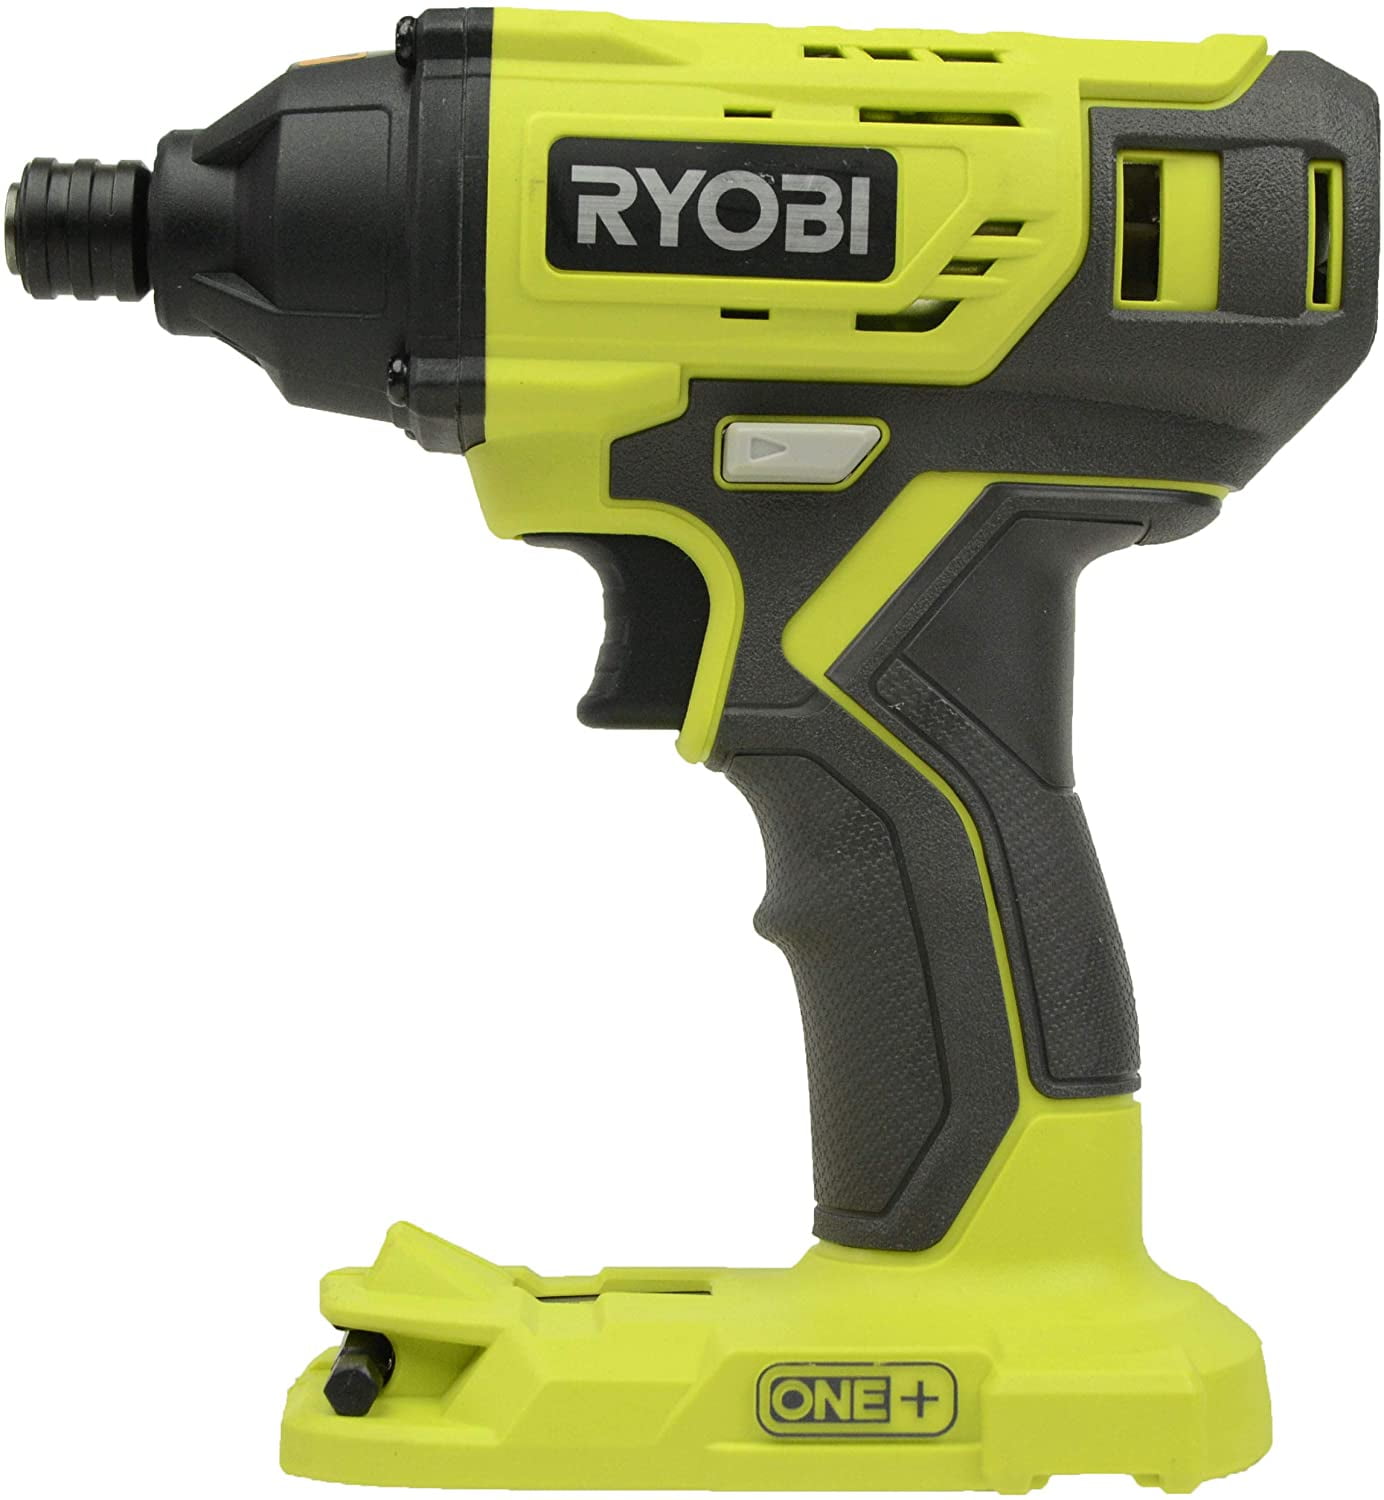 Details about   RYOBI D620H 5/8" 6.2 Amp HEAVY DUTY VARIABLE SPEED CORDED HAMMER DRILL LN 